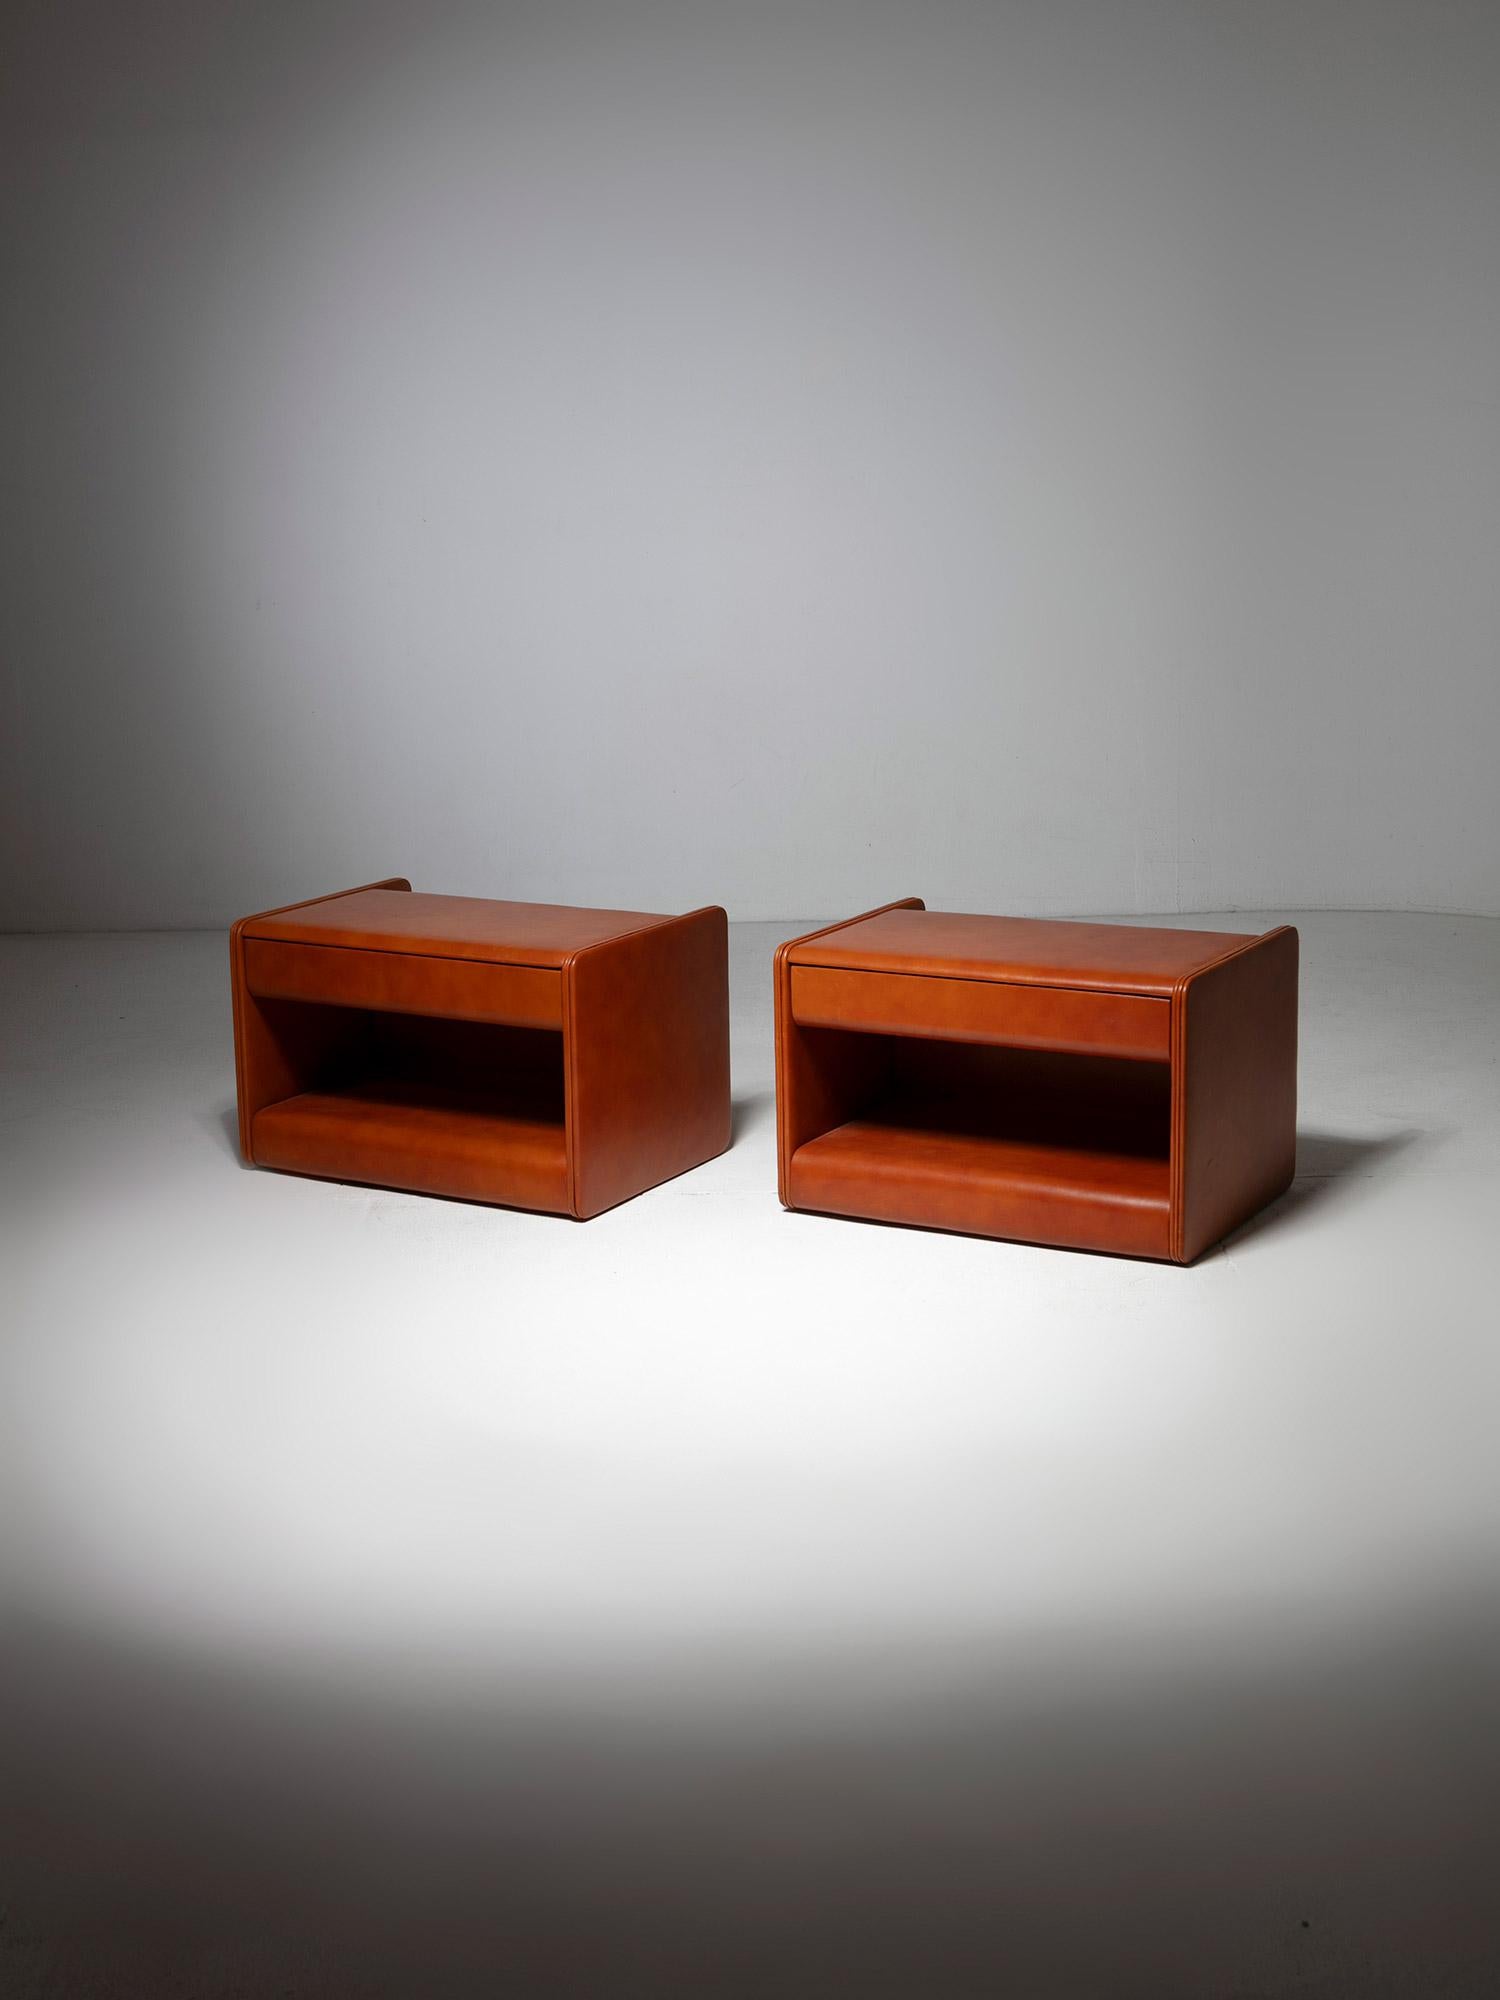 Pair of night stands by Luigi Massoni for Poltrona Frau.
Fully leather covered pieces, featuring a front drawer and large opening.
Back with aluminum pocket to hold books.
